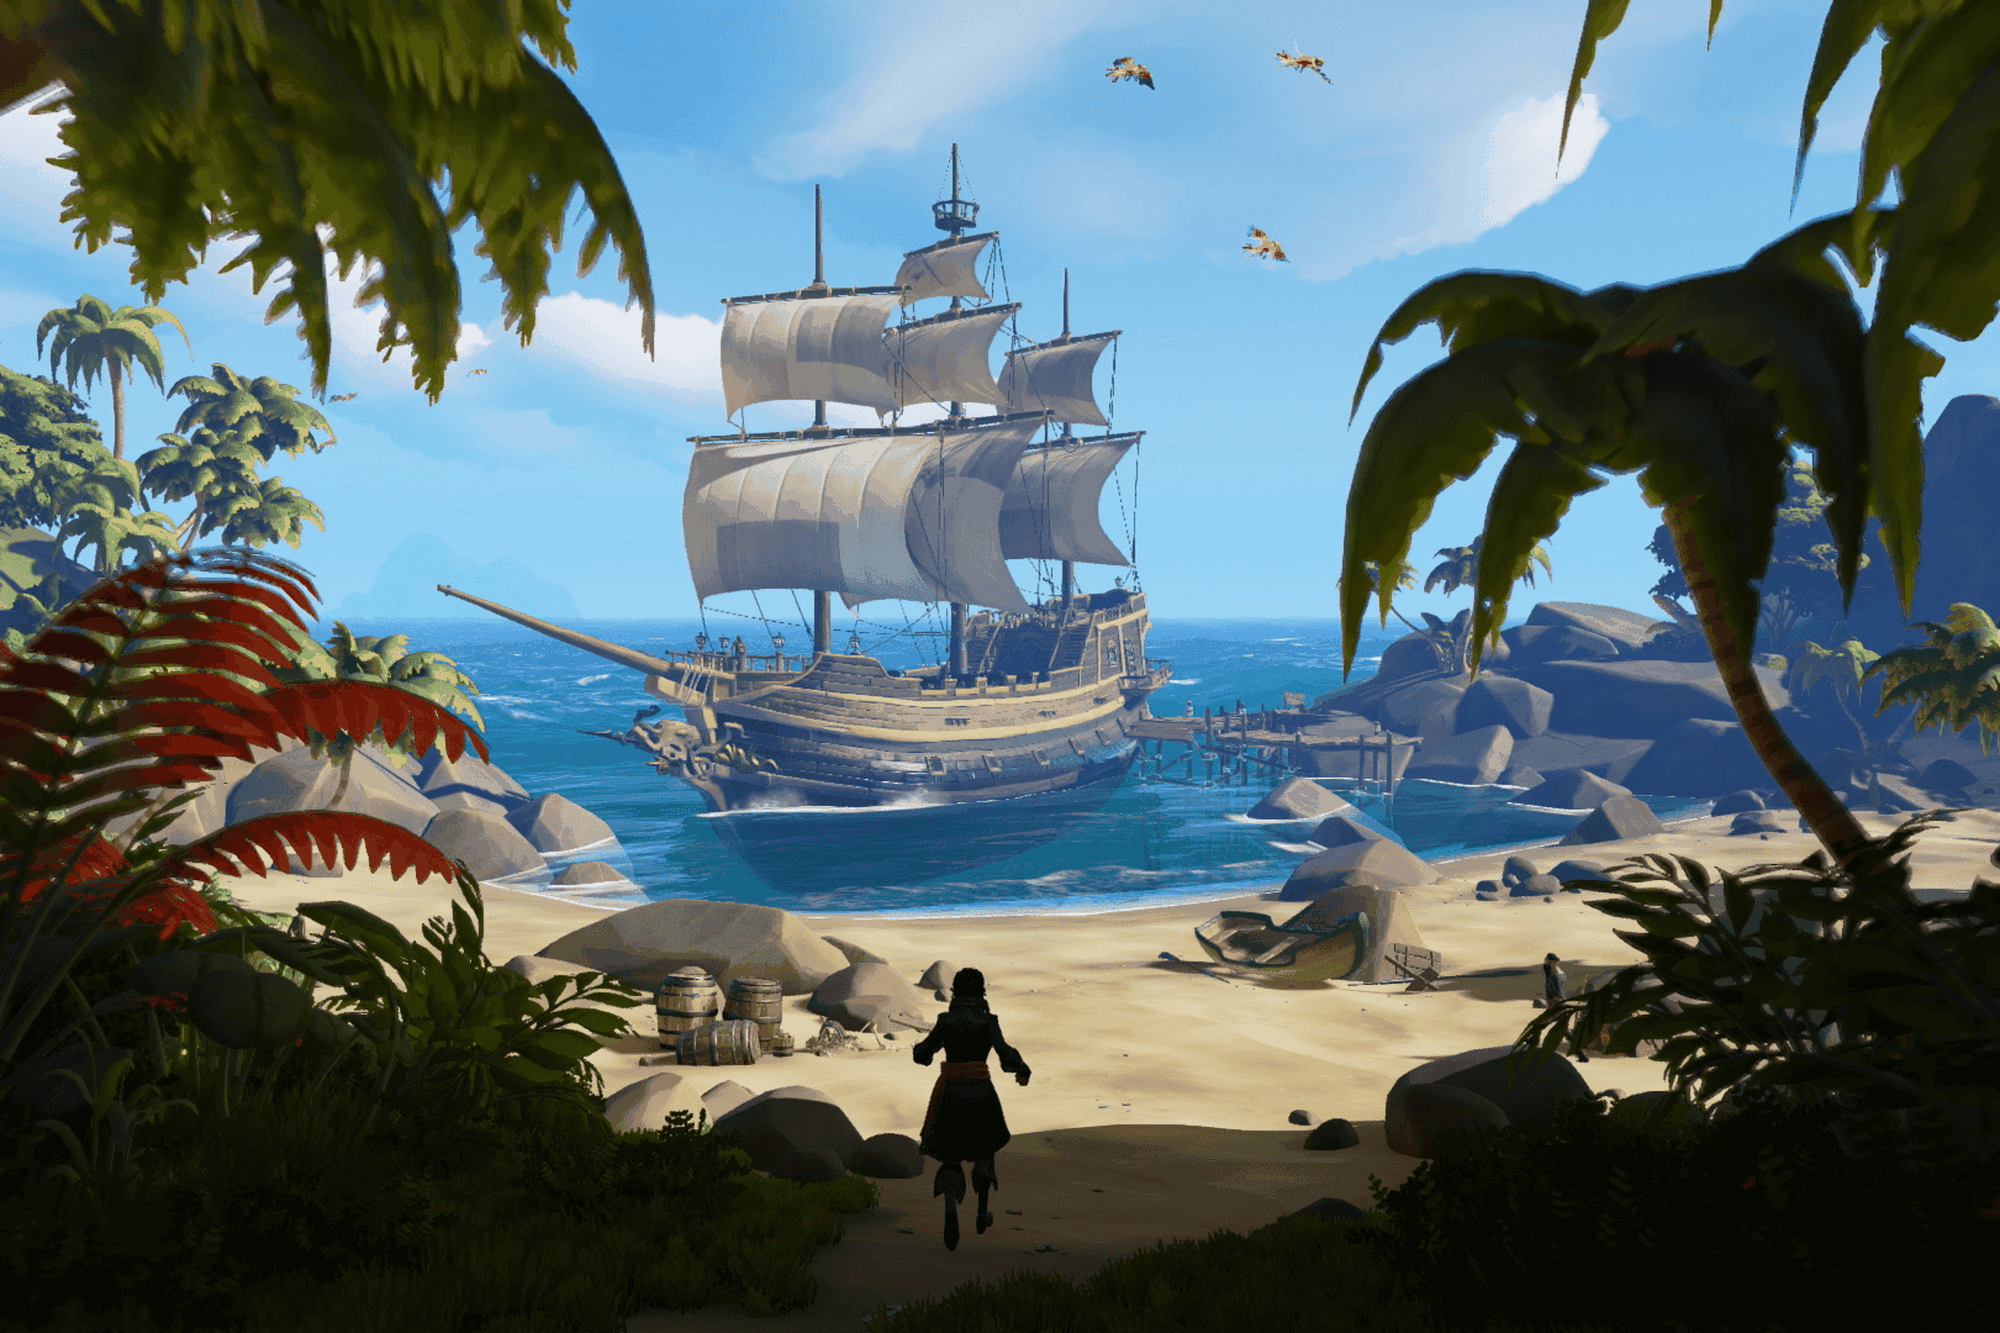 Verstenen Een nacht laden Sea of Thieves is huge, fun, and just what the Xbox One needs - The Verge